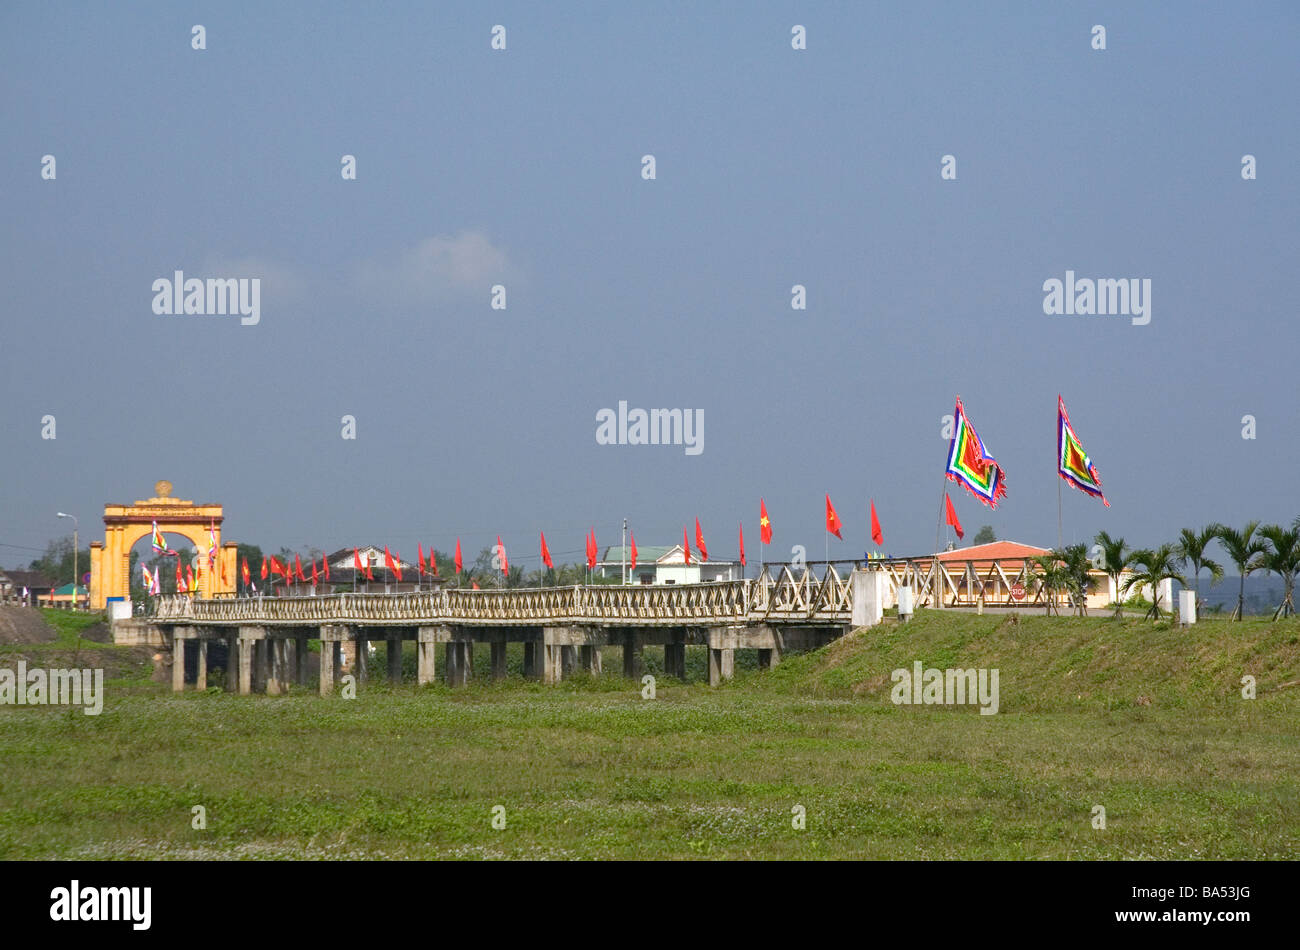 Memorial portal to Ho Chi Minh at the Hien Luong Bridge spanning the Ben Hai River in Quang Tri Province Vietnam Stock Photo